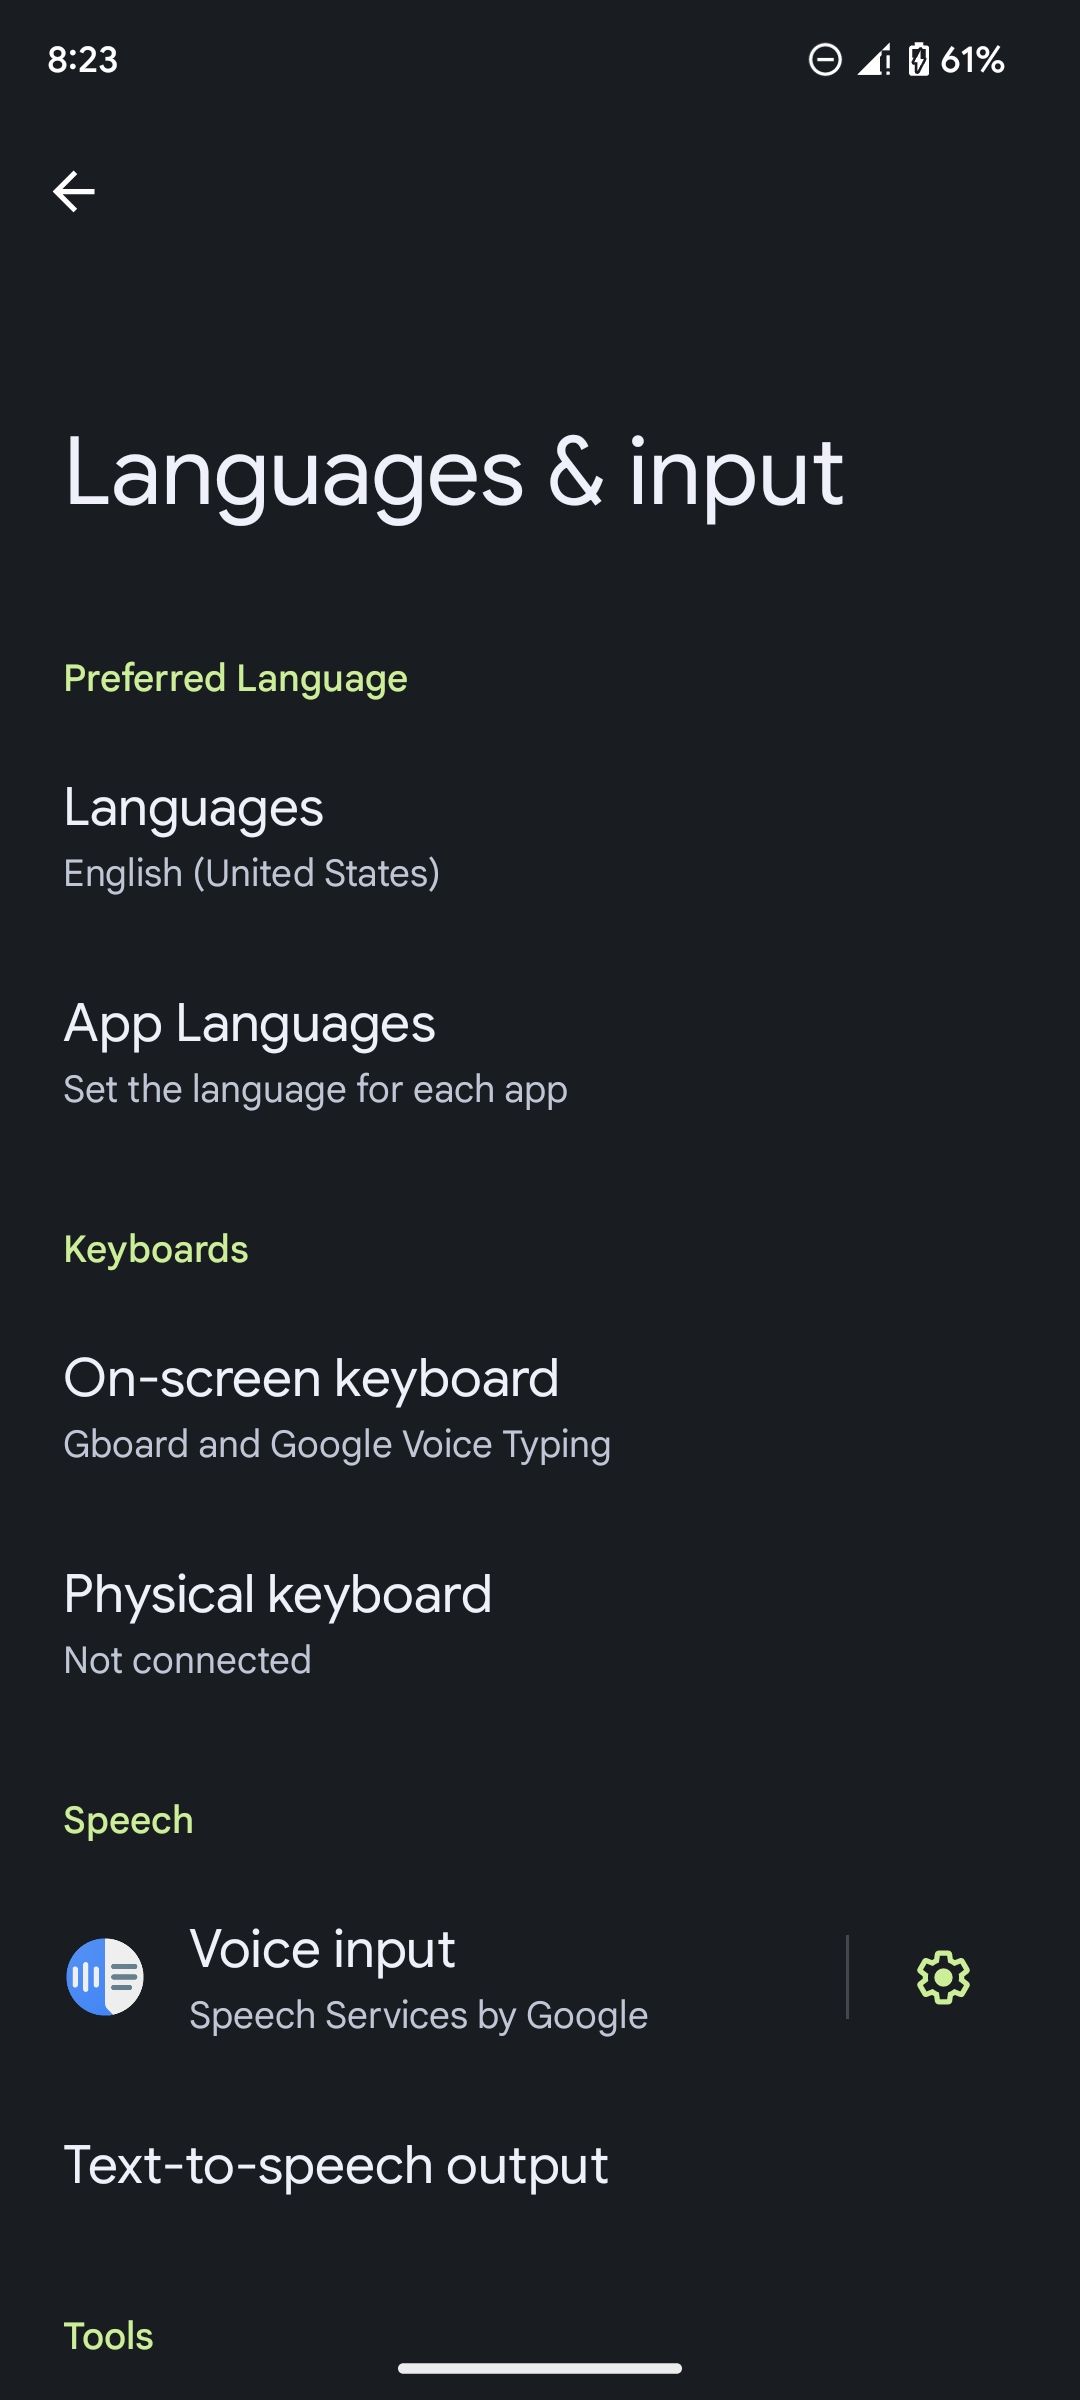 Languages and input page on Android